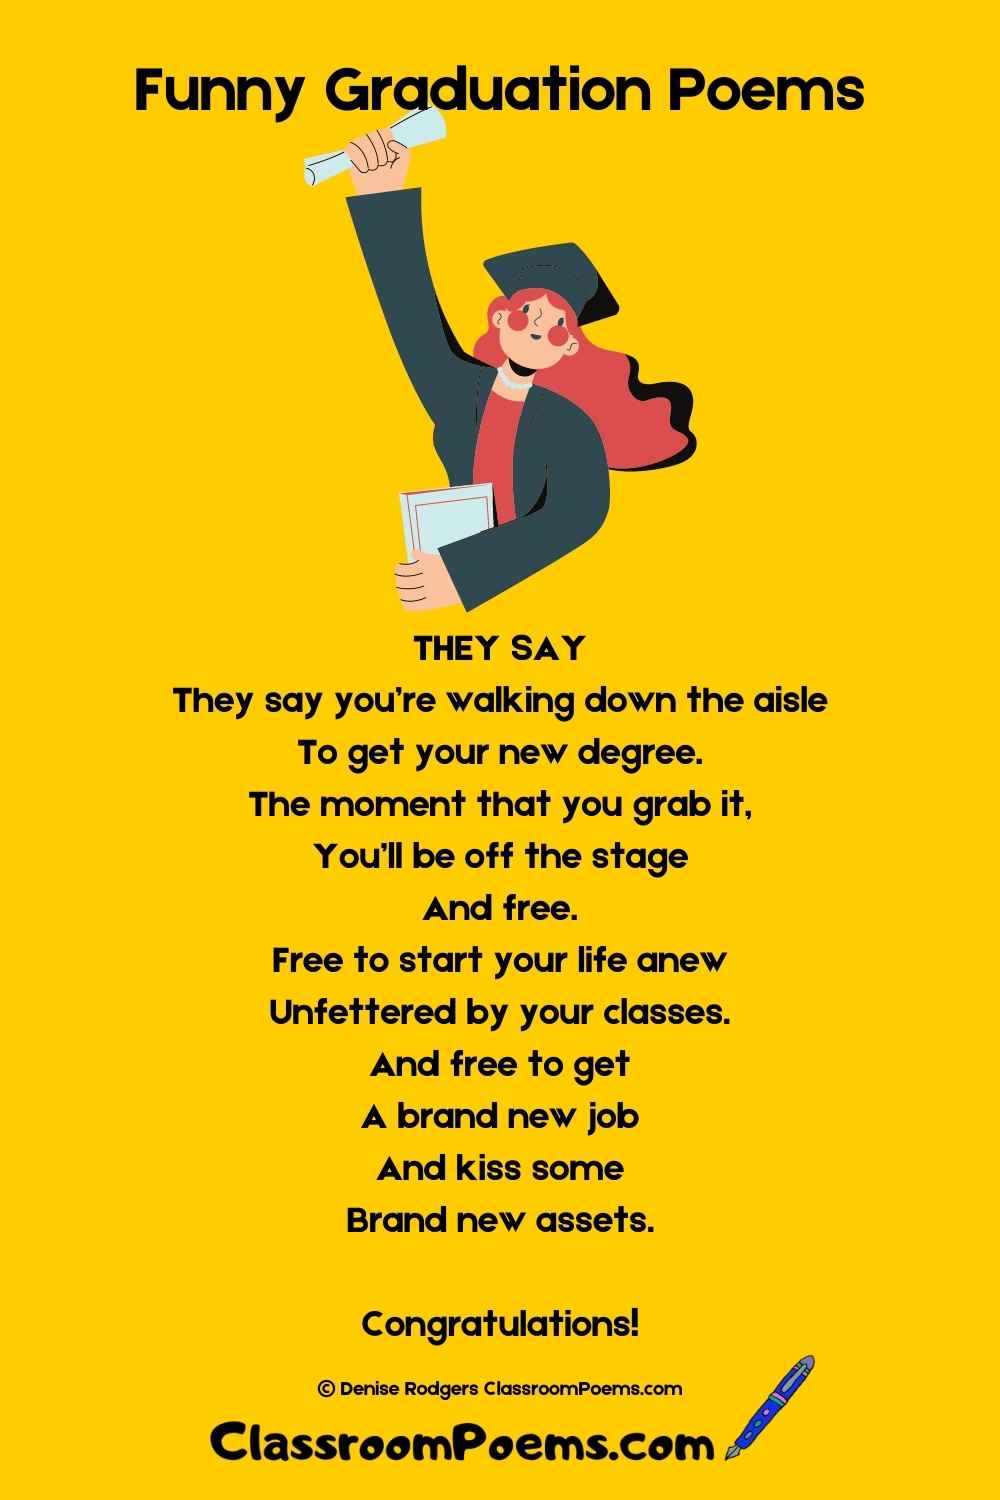 Funny Graduation Poems by Denise Rodgers on ClassroomPoems.com.